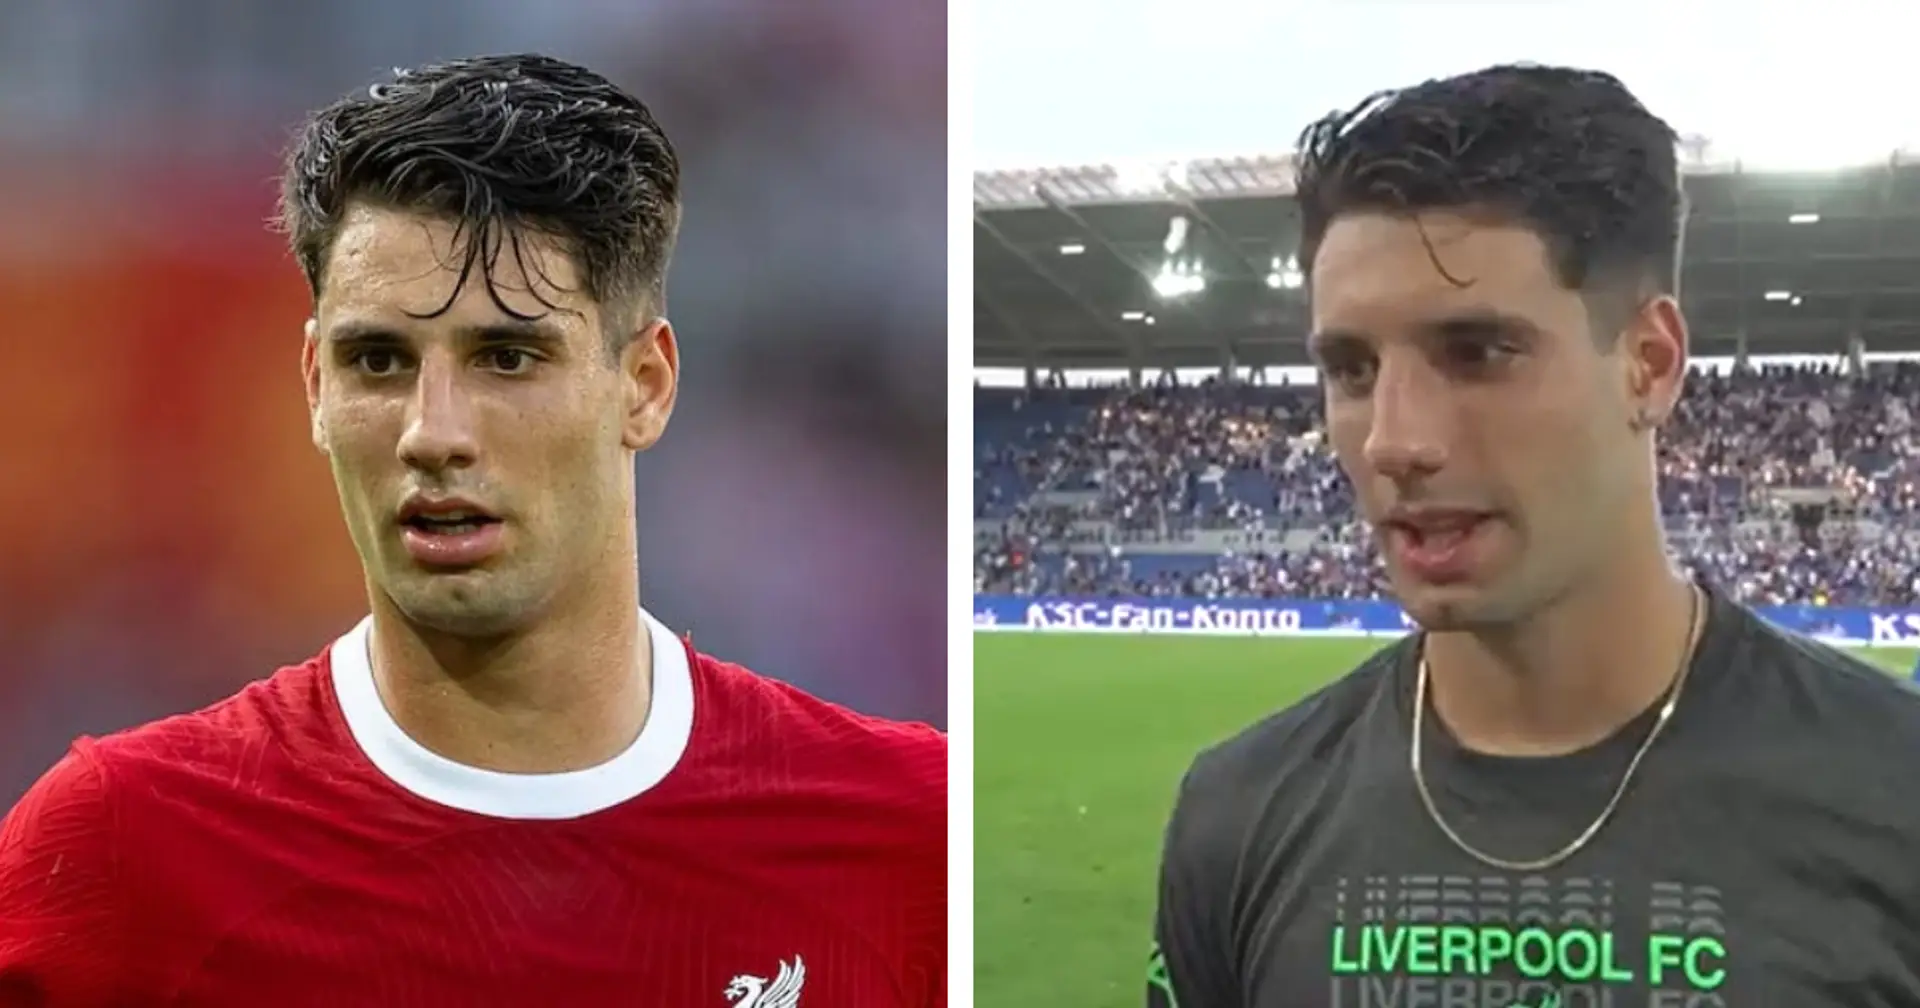 'A dream is going to come true': Szoboszlai reacts after first game in Liverpool shirt